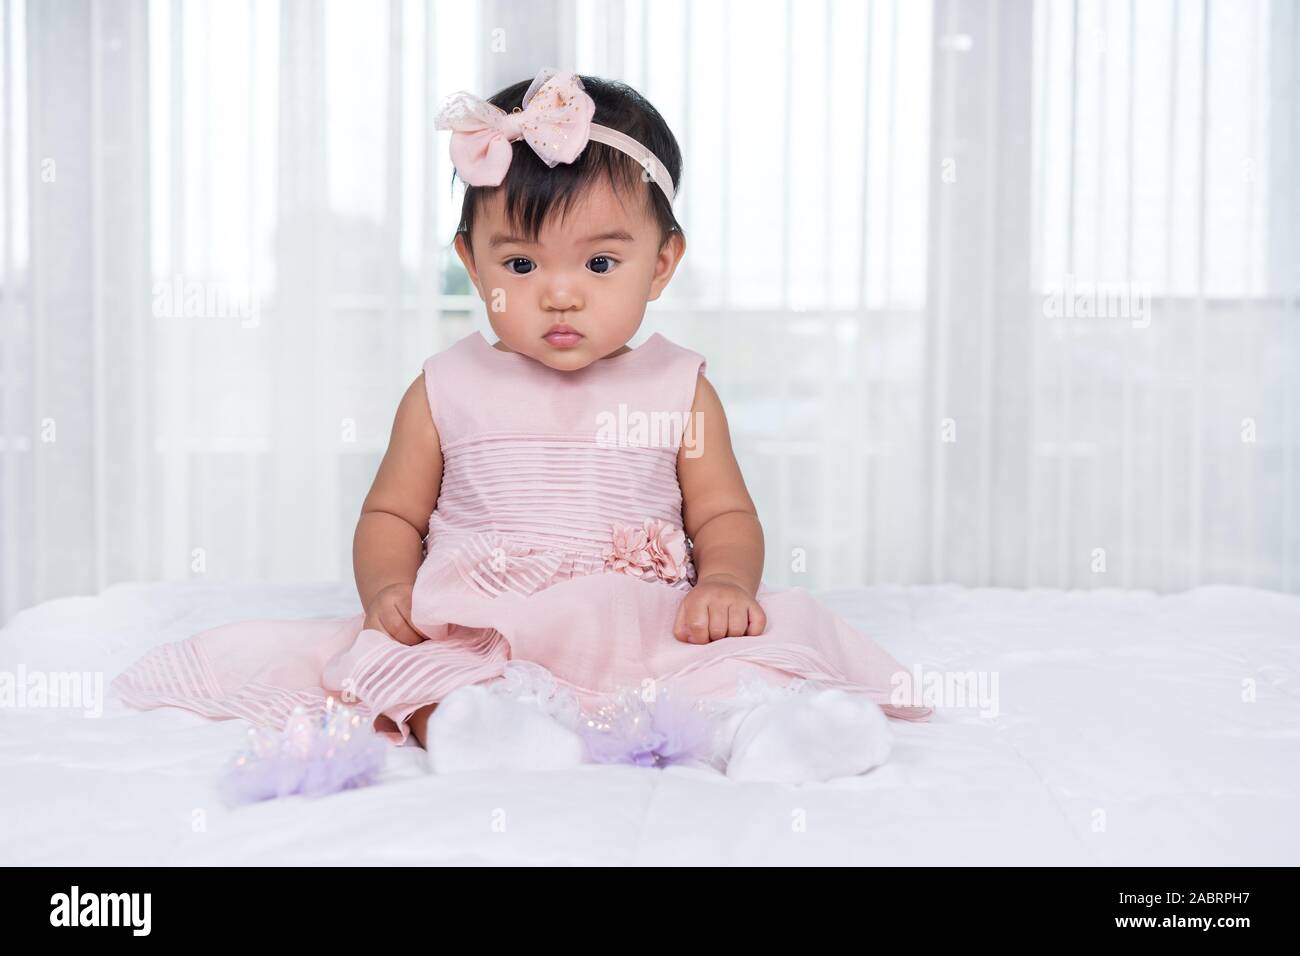 baby in pink dress on a bed Stock Photo - Alamy